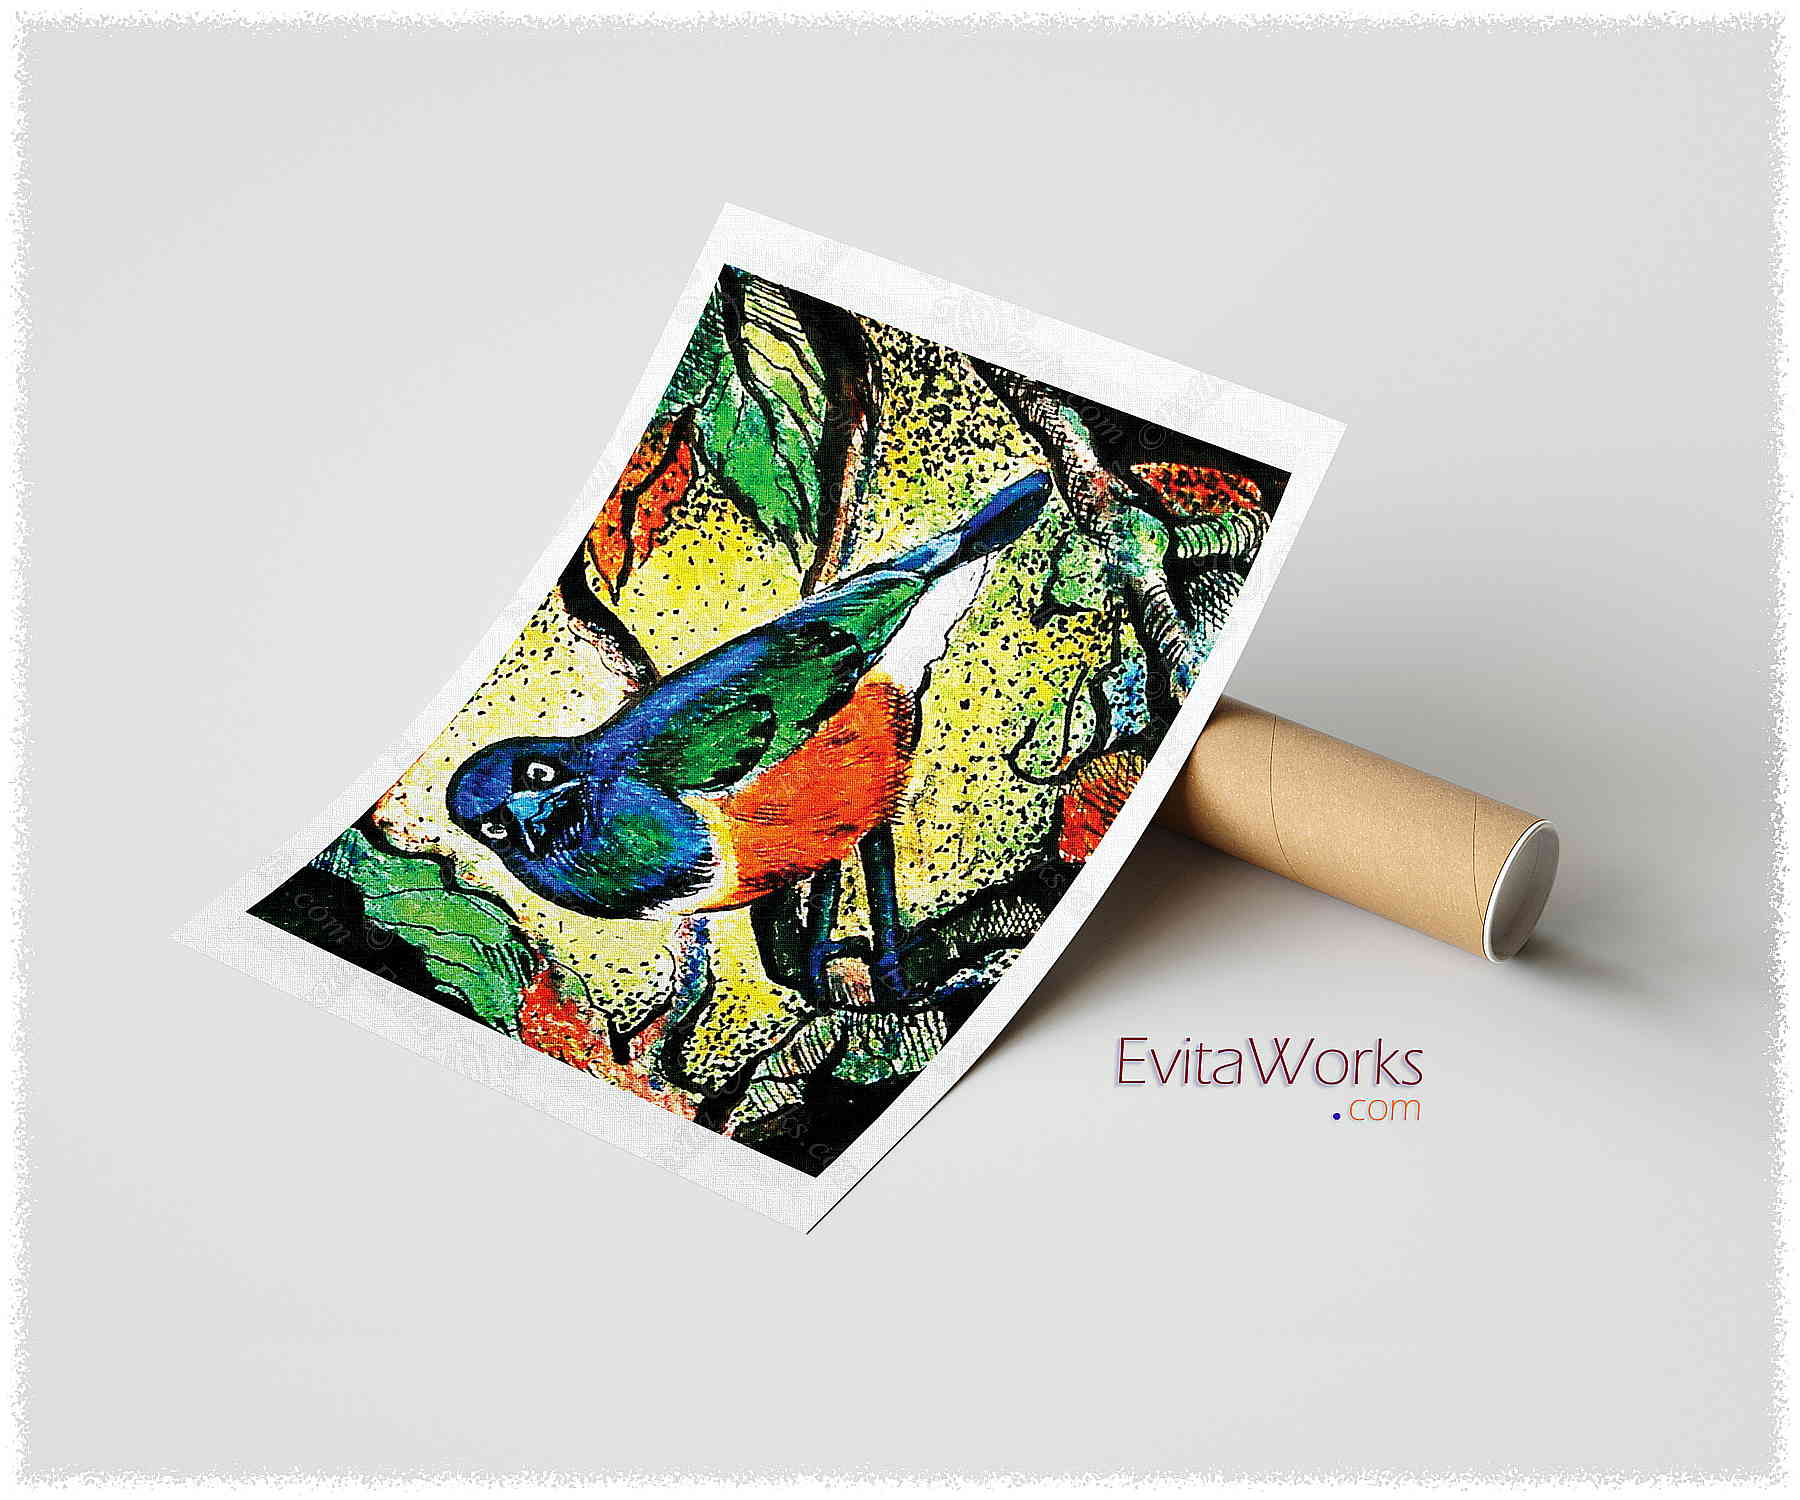 Hit to learn about "Bird in nature illustration 05" on prints